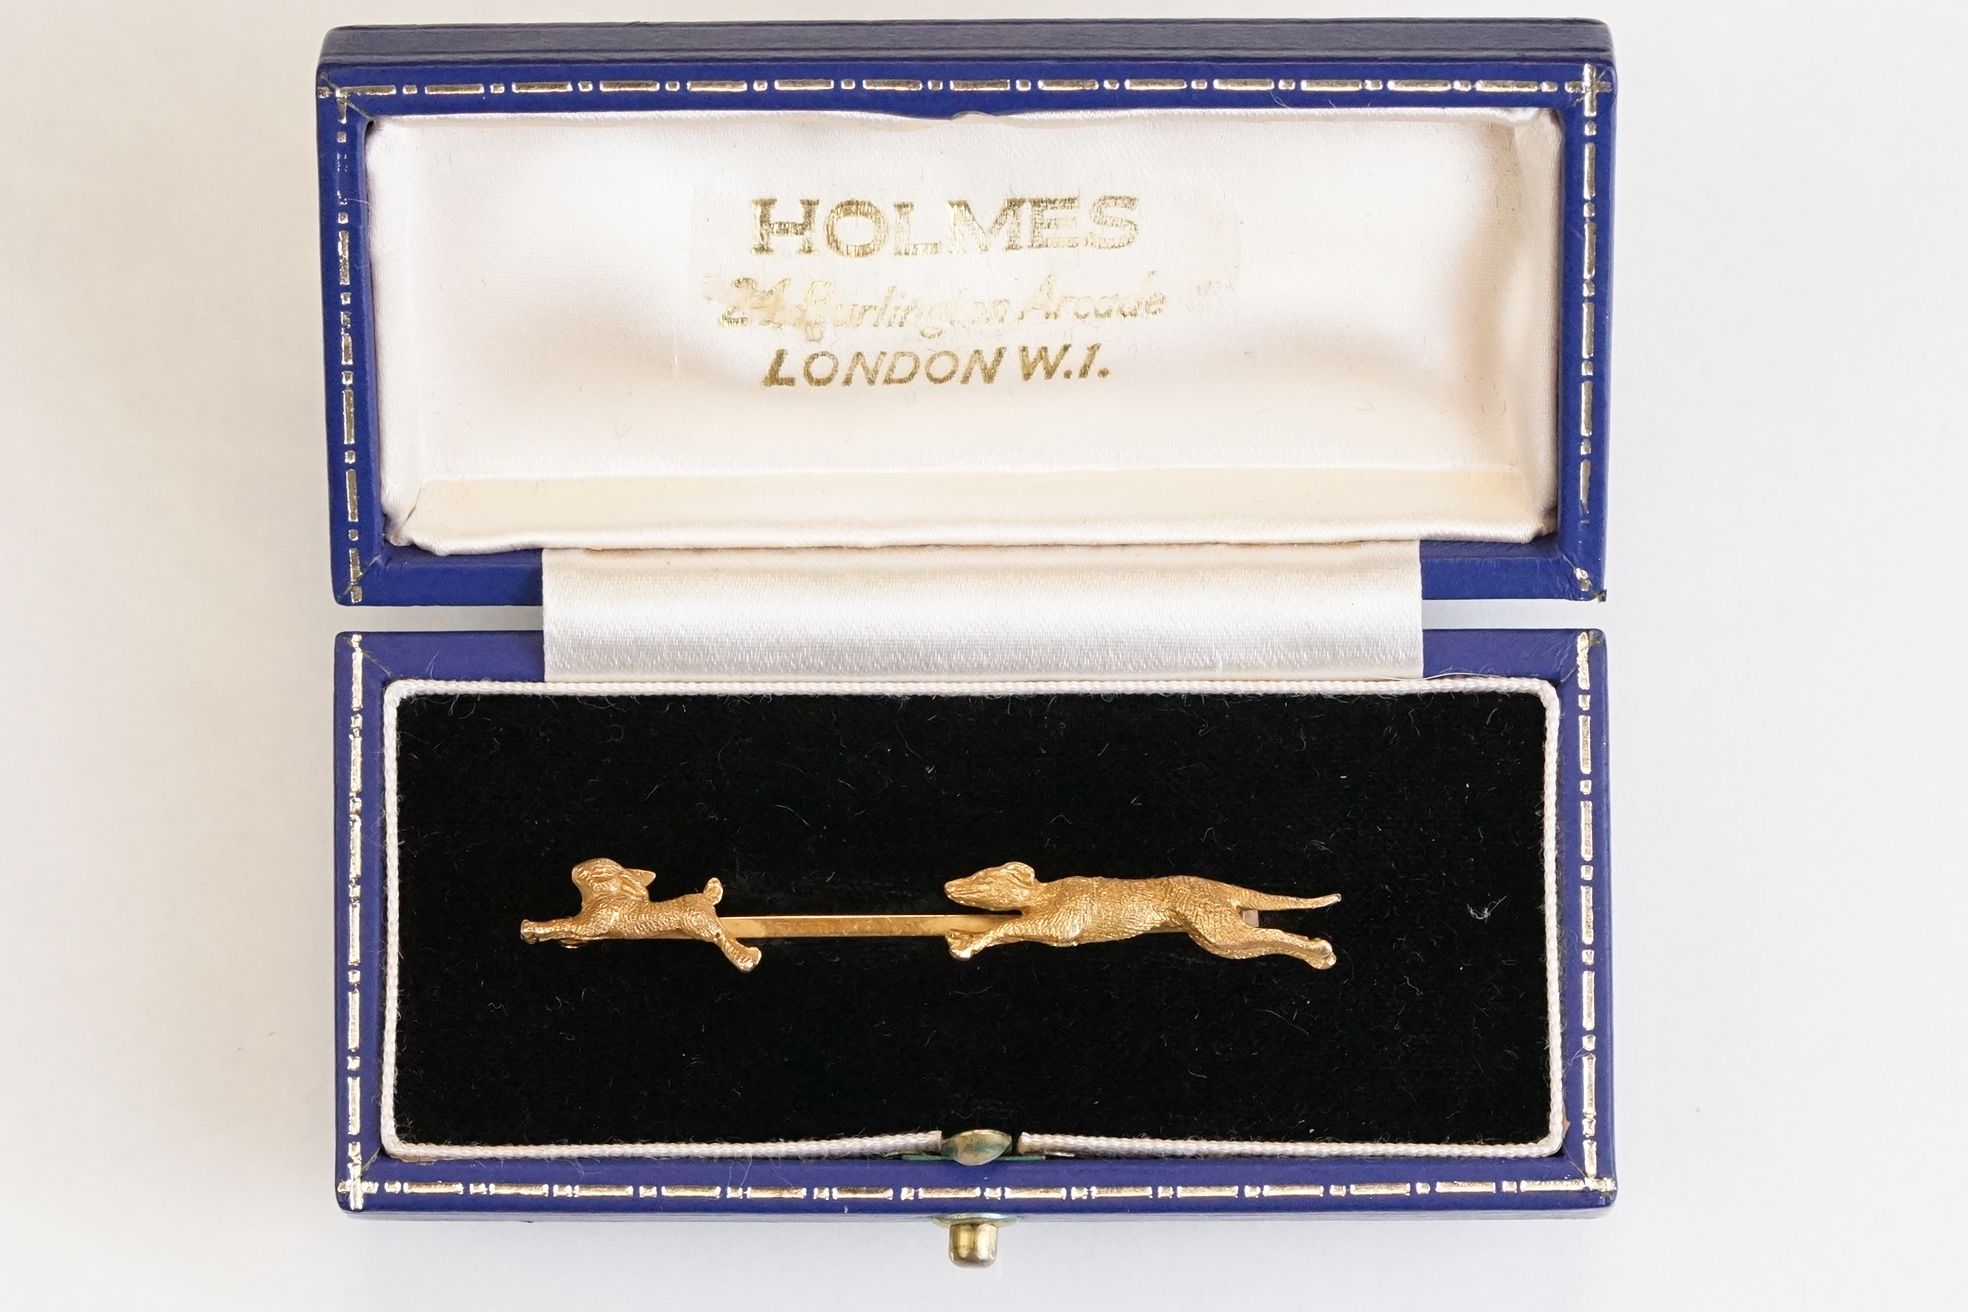 Early 20th century 9ct yellow gold bar brooch modelled as a hound dog chasing a rabbit, early 20th - Image 8 of 8